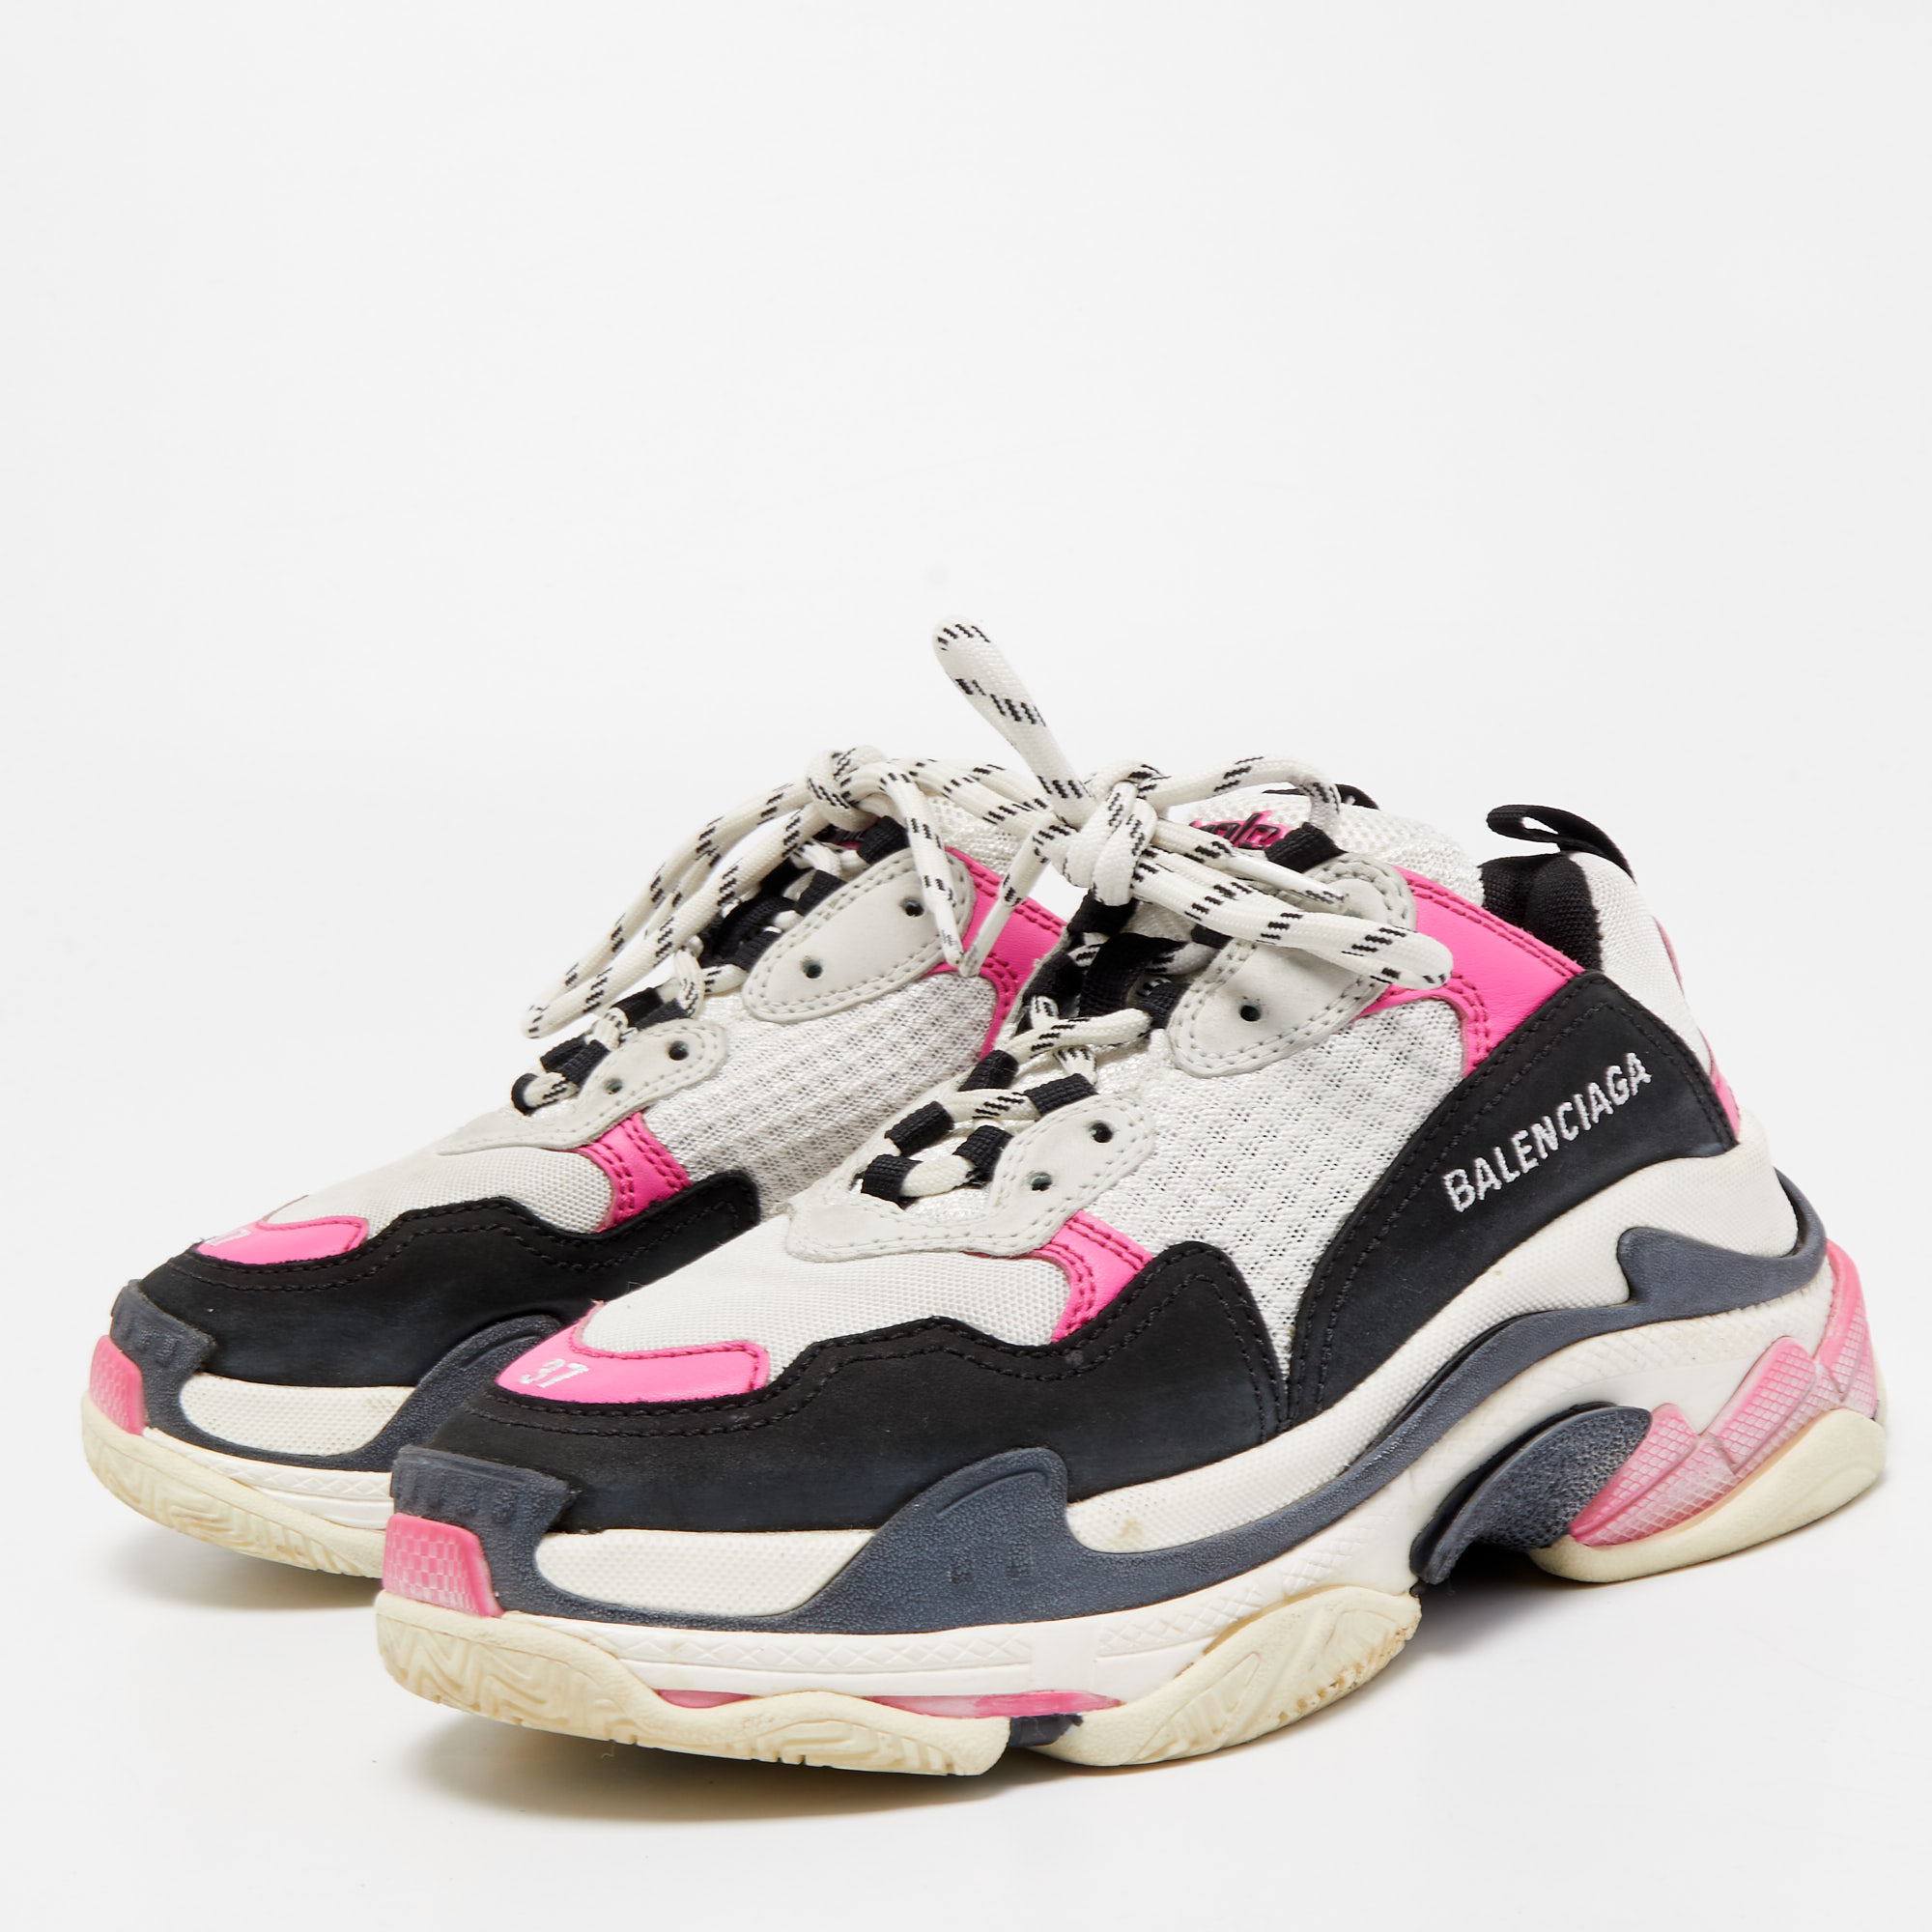 

Balenciaga Tricolor Mesh and Leather Triple S Sneakers Size, Pink